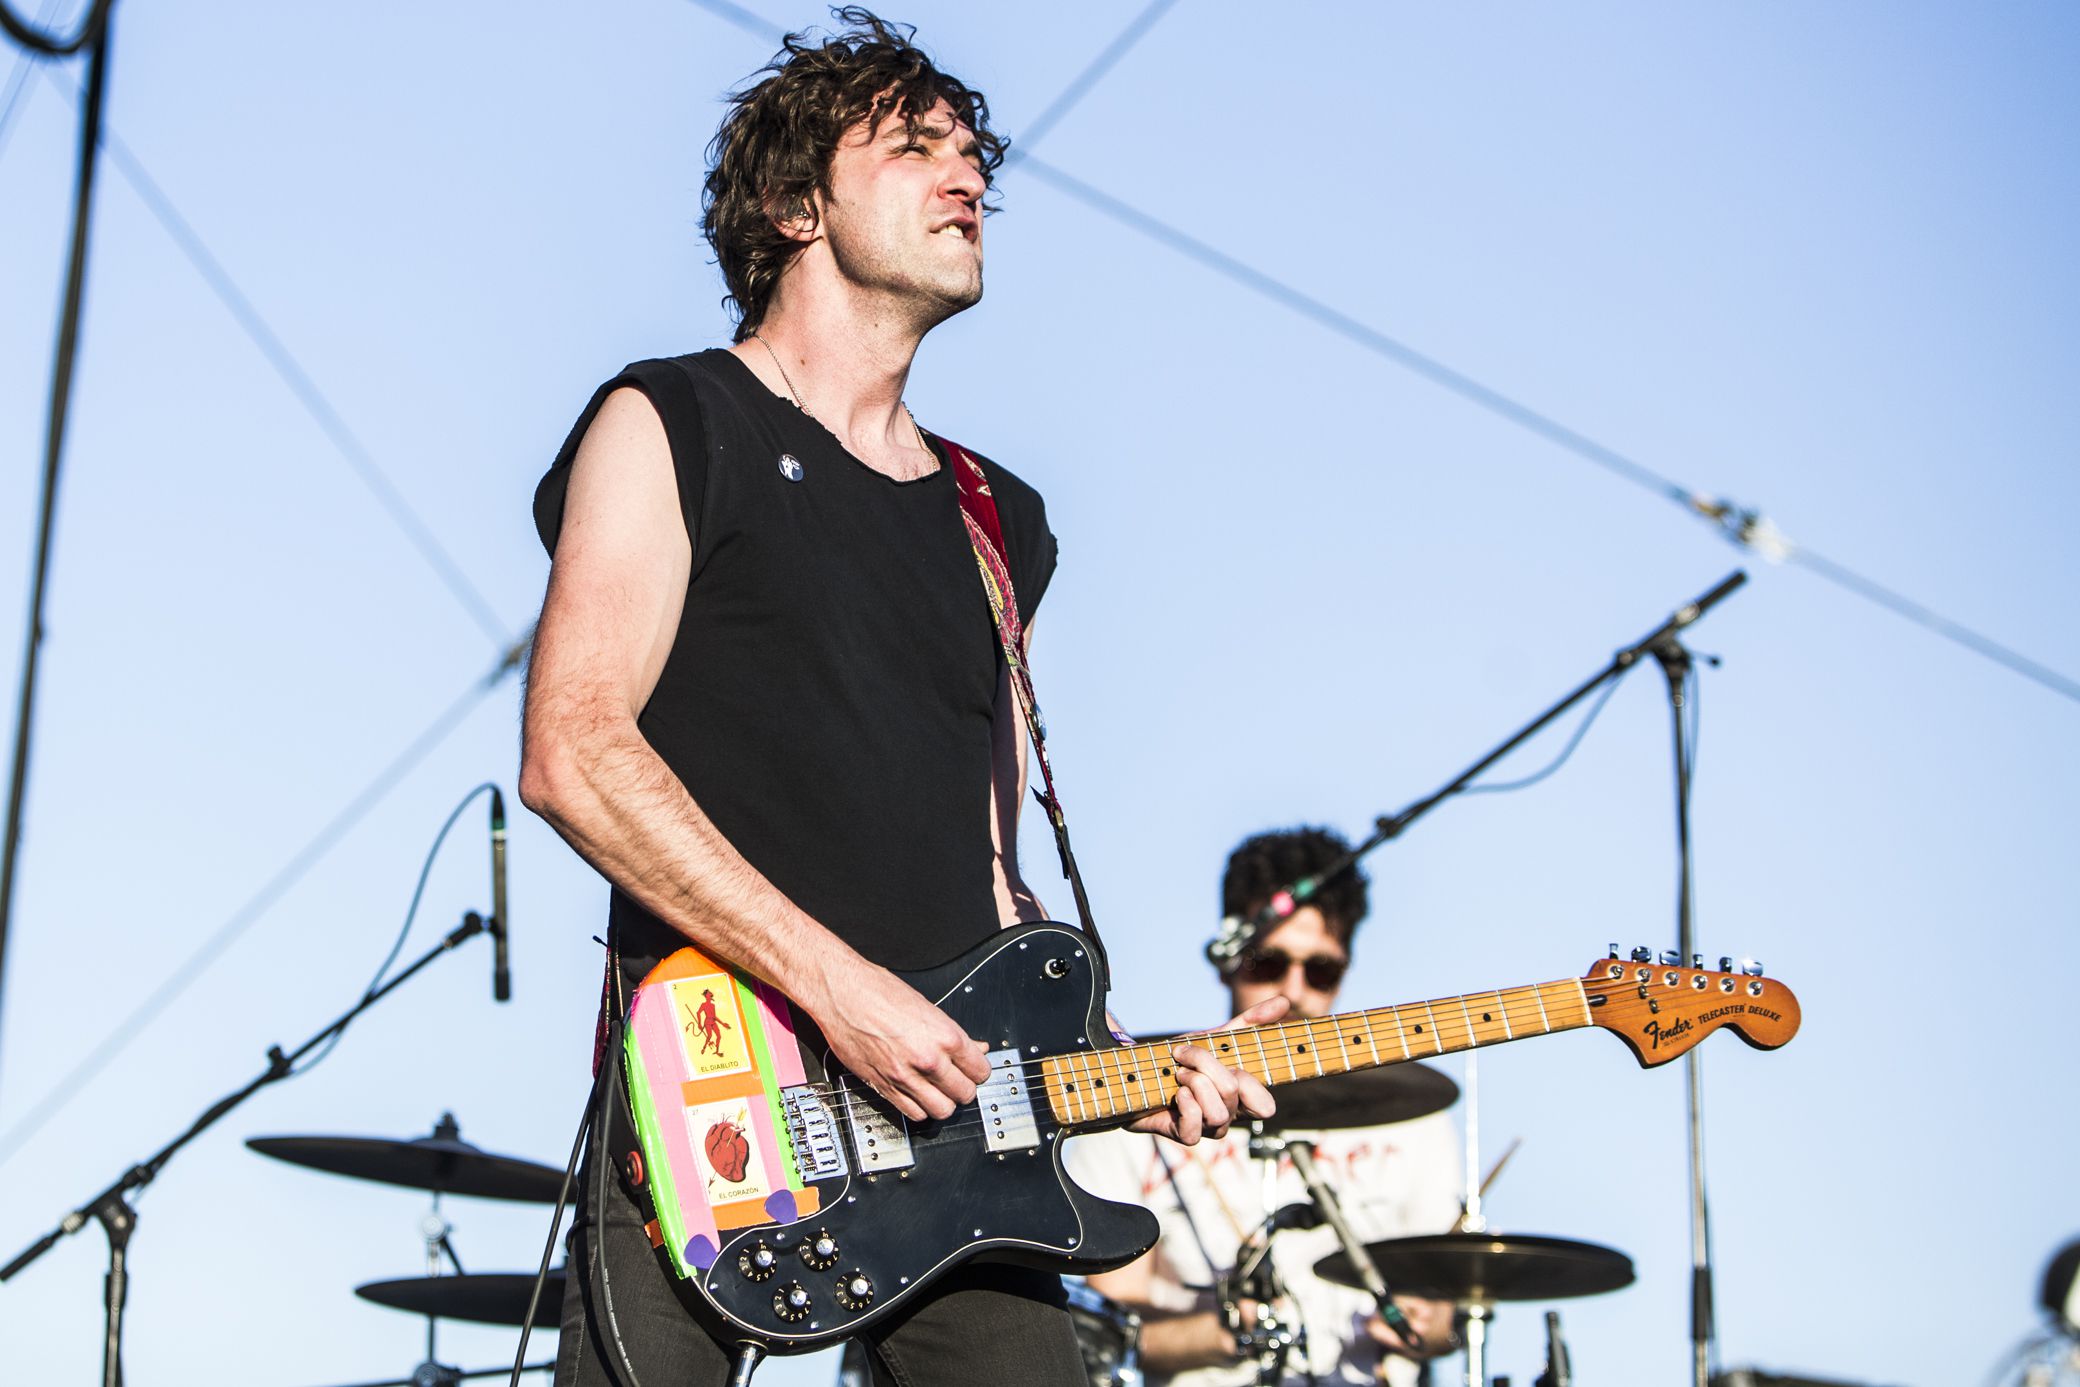 japandroids 3 Cal Jam Offered Everything Youd Want From Dave Grohl